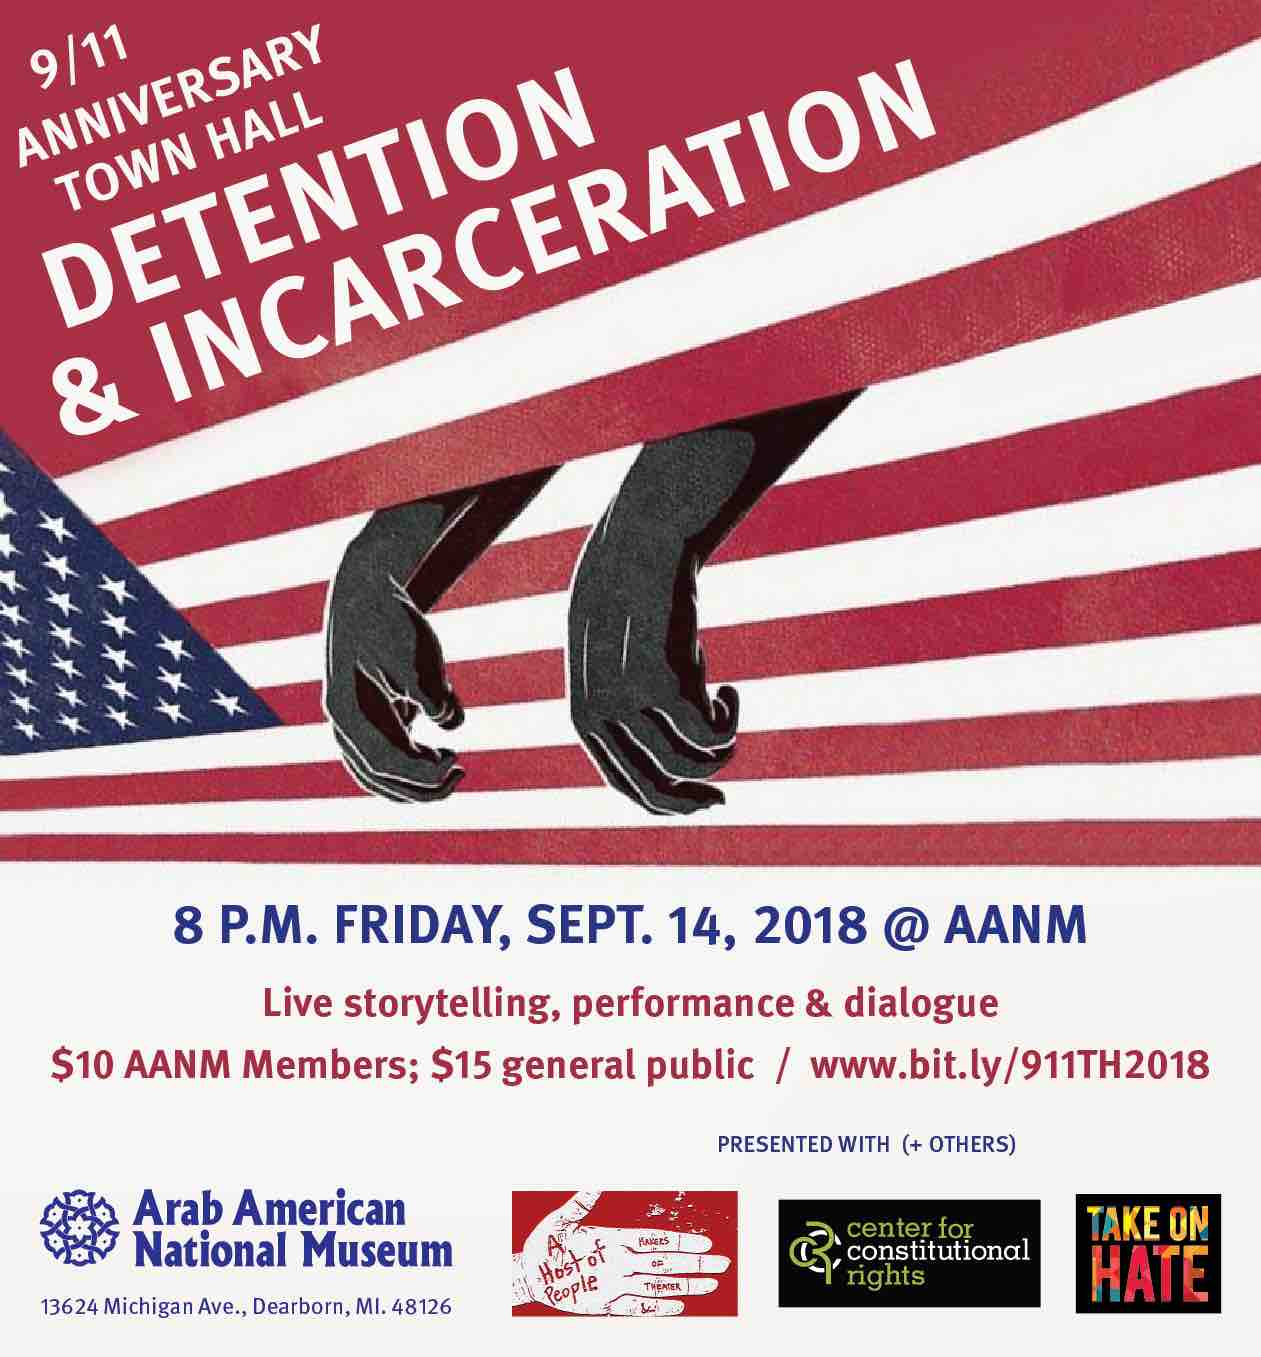 9/11 anniversary town hall: Detention and incarceration